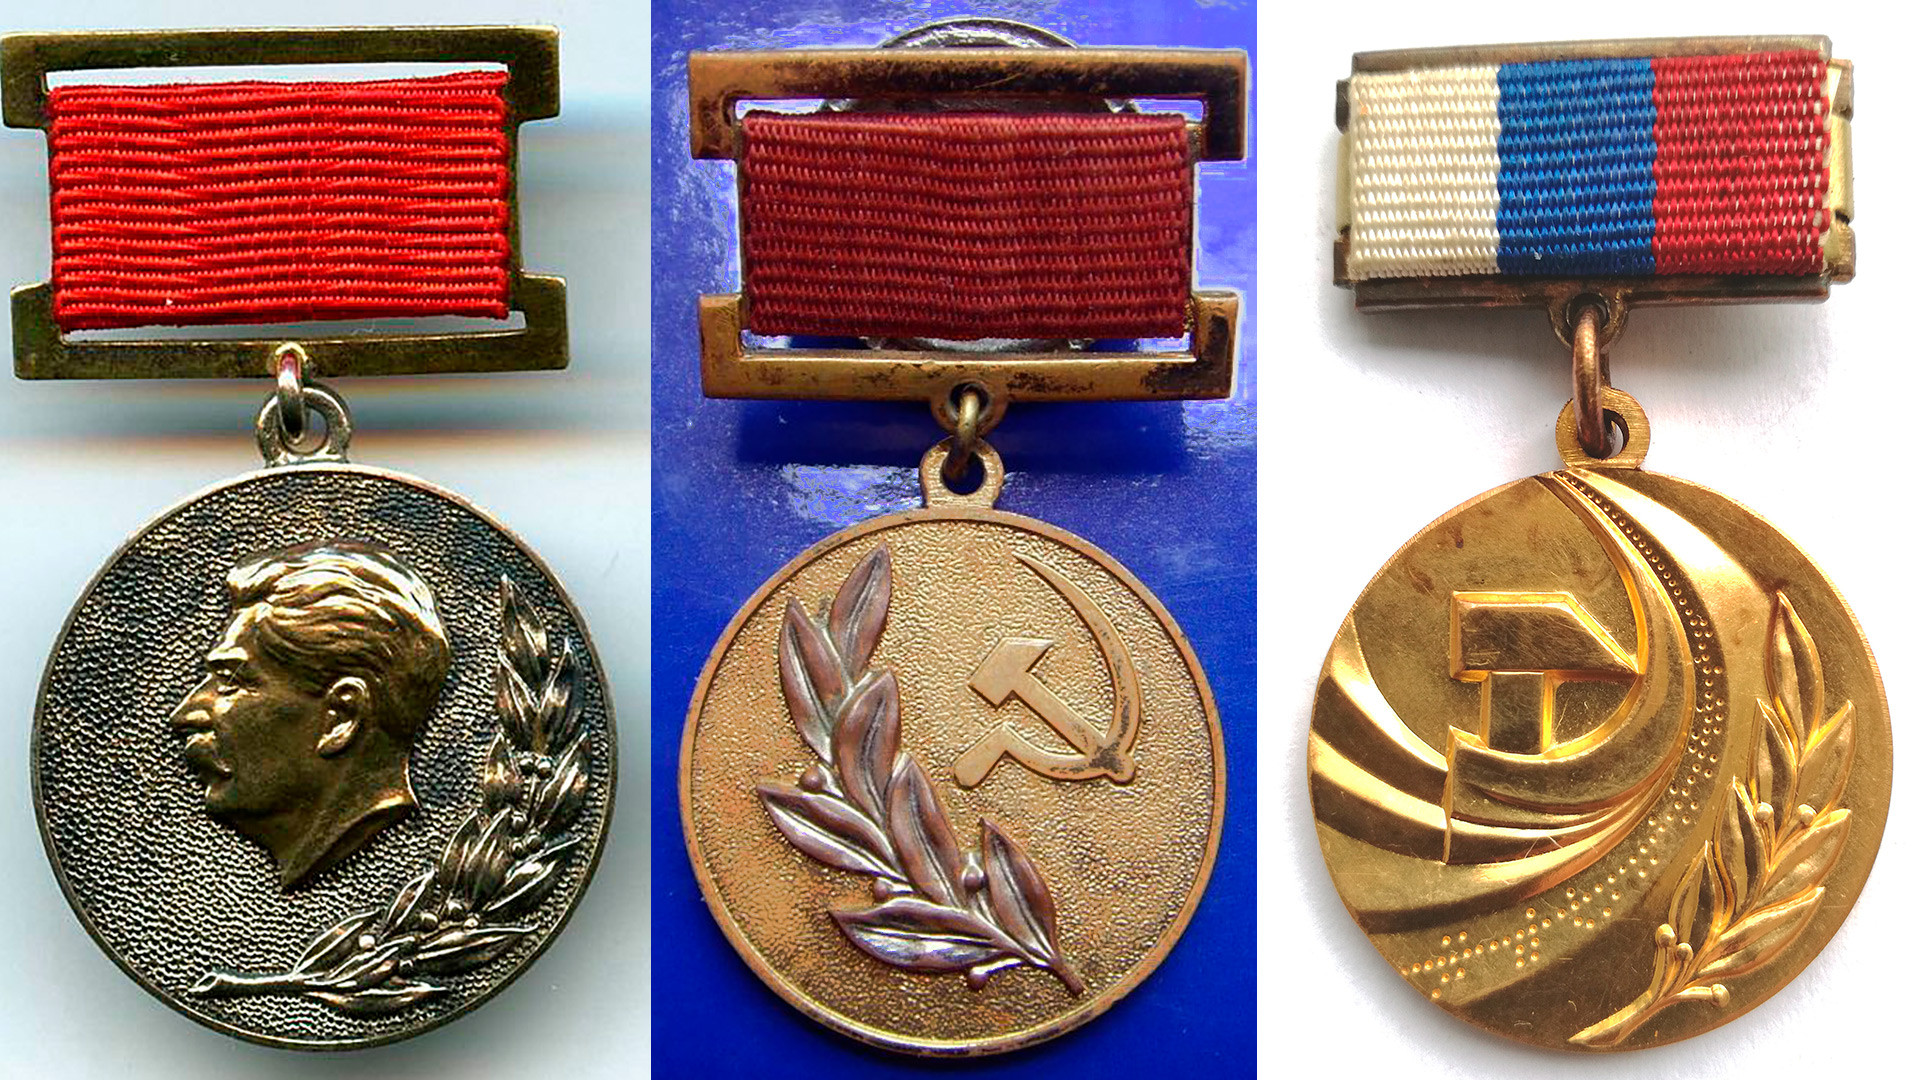 State Prizes' medals from the Stalin's USSR to contemporary Russia